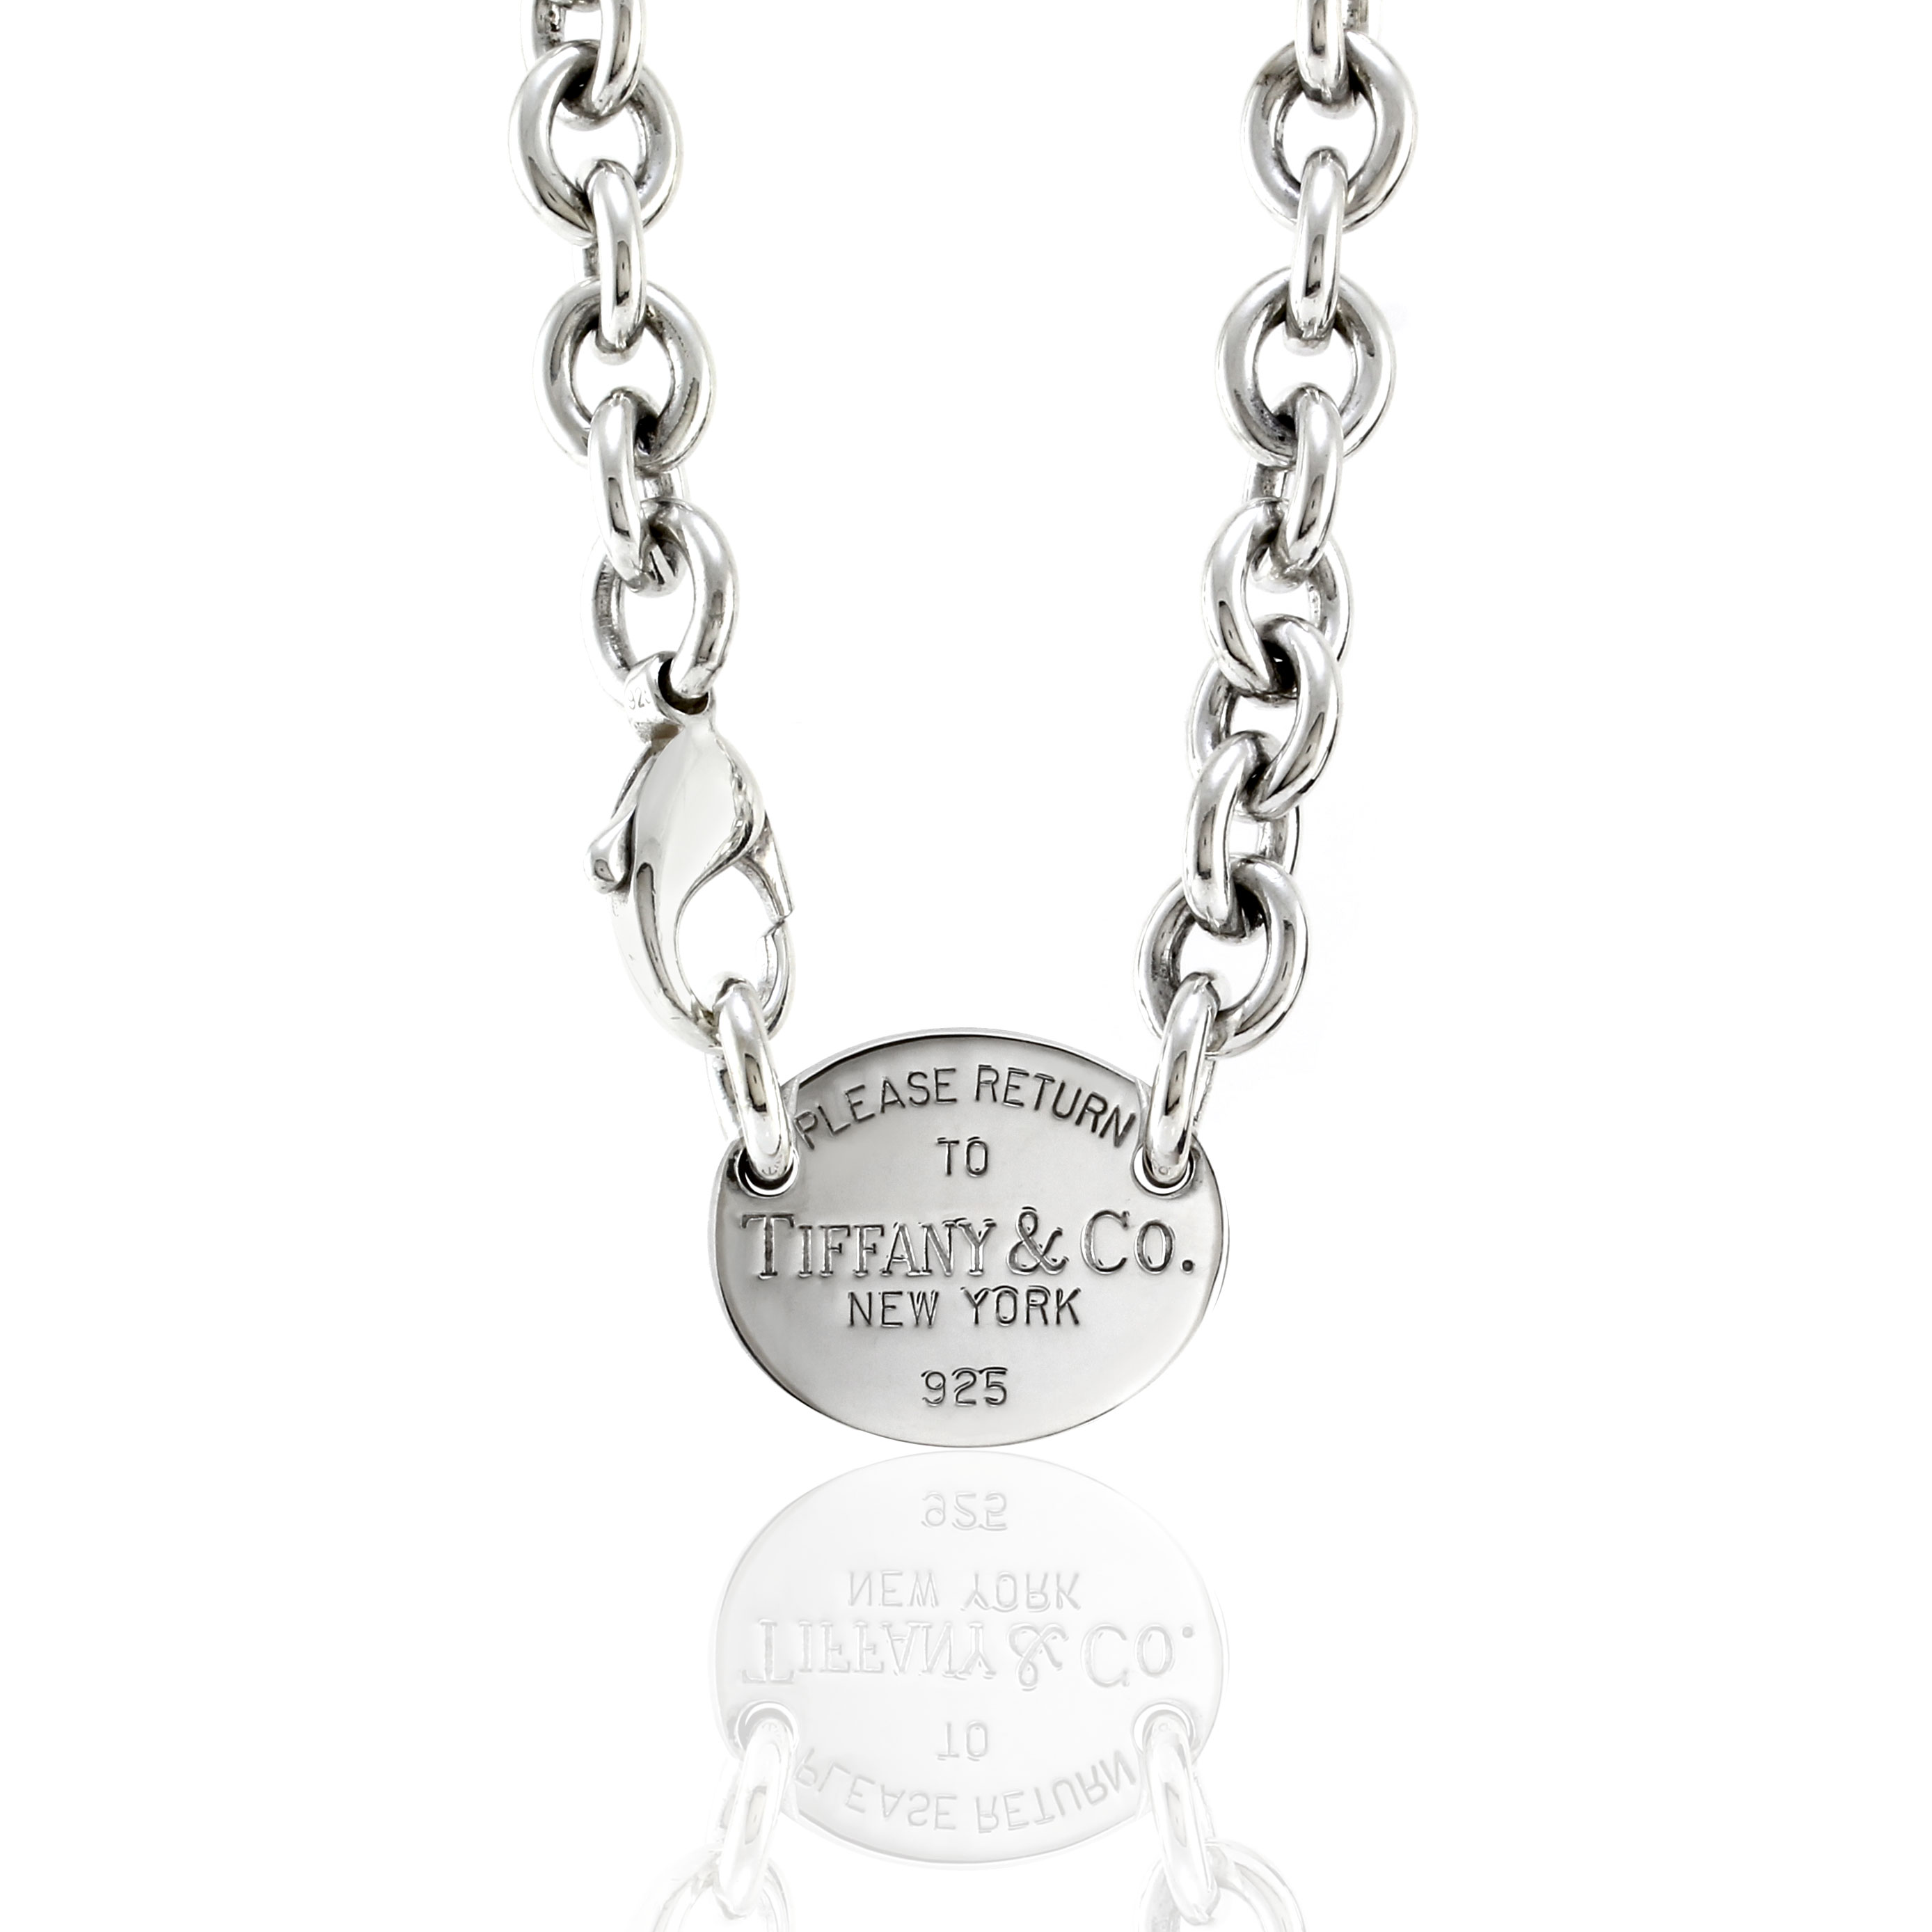 Tiffany & Co. Oval Tag Necklace in Silver